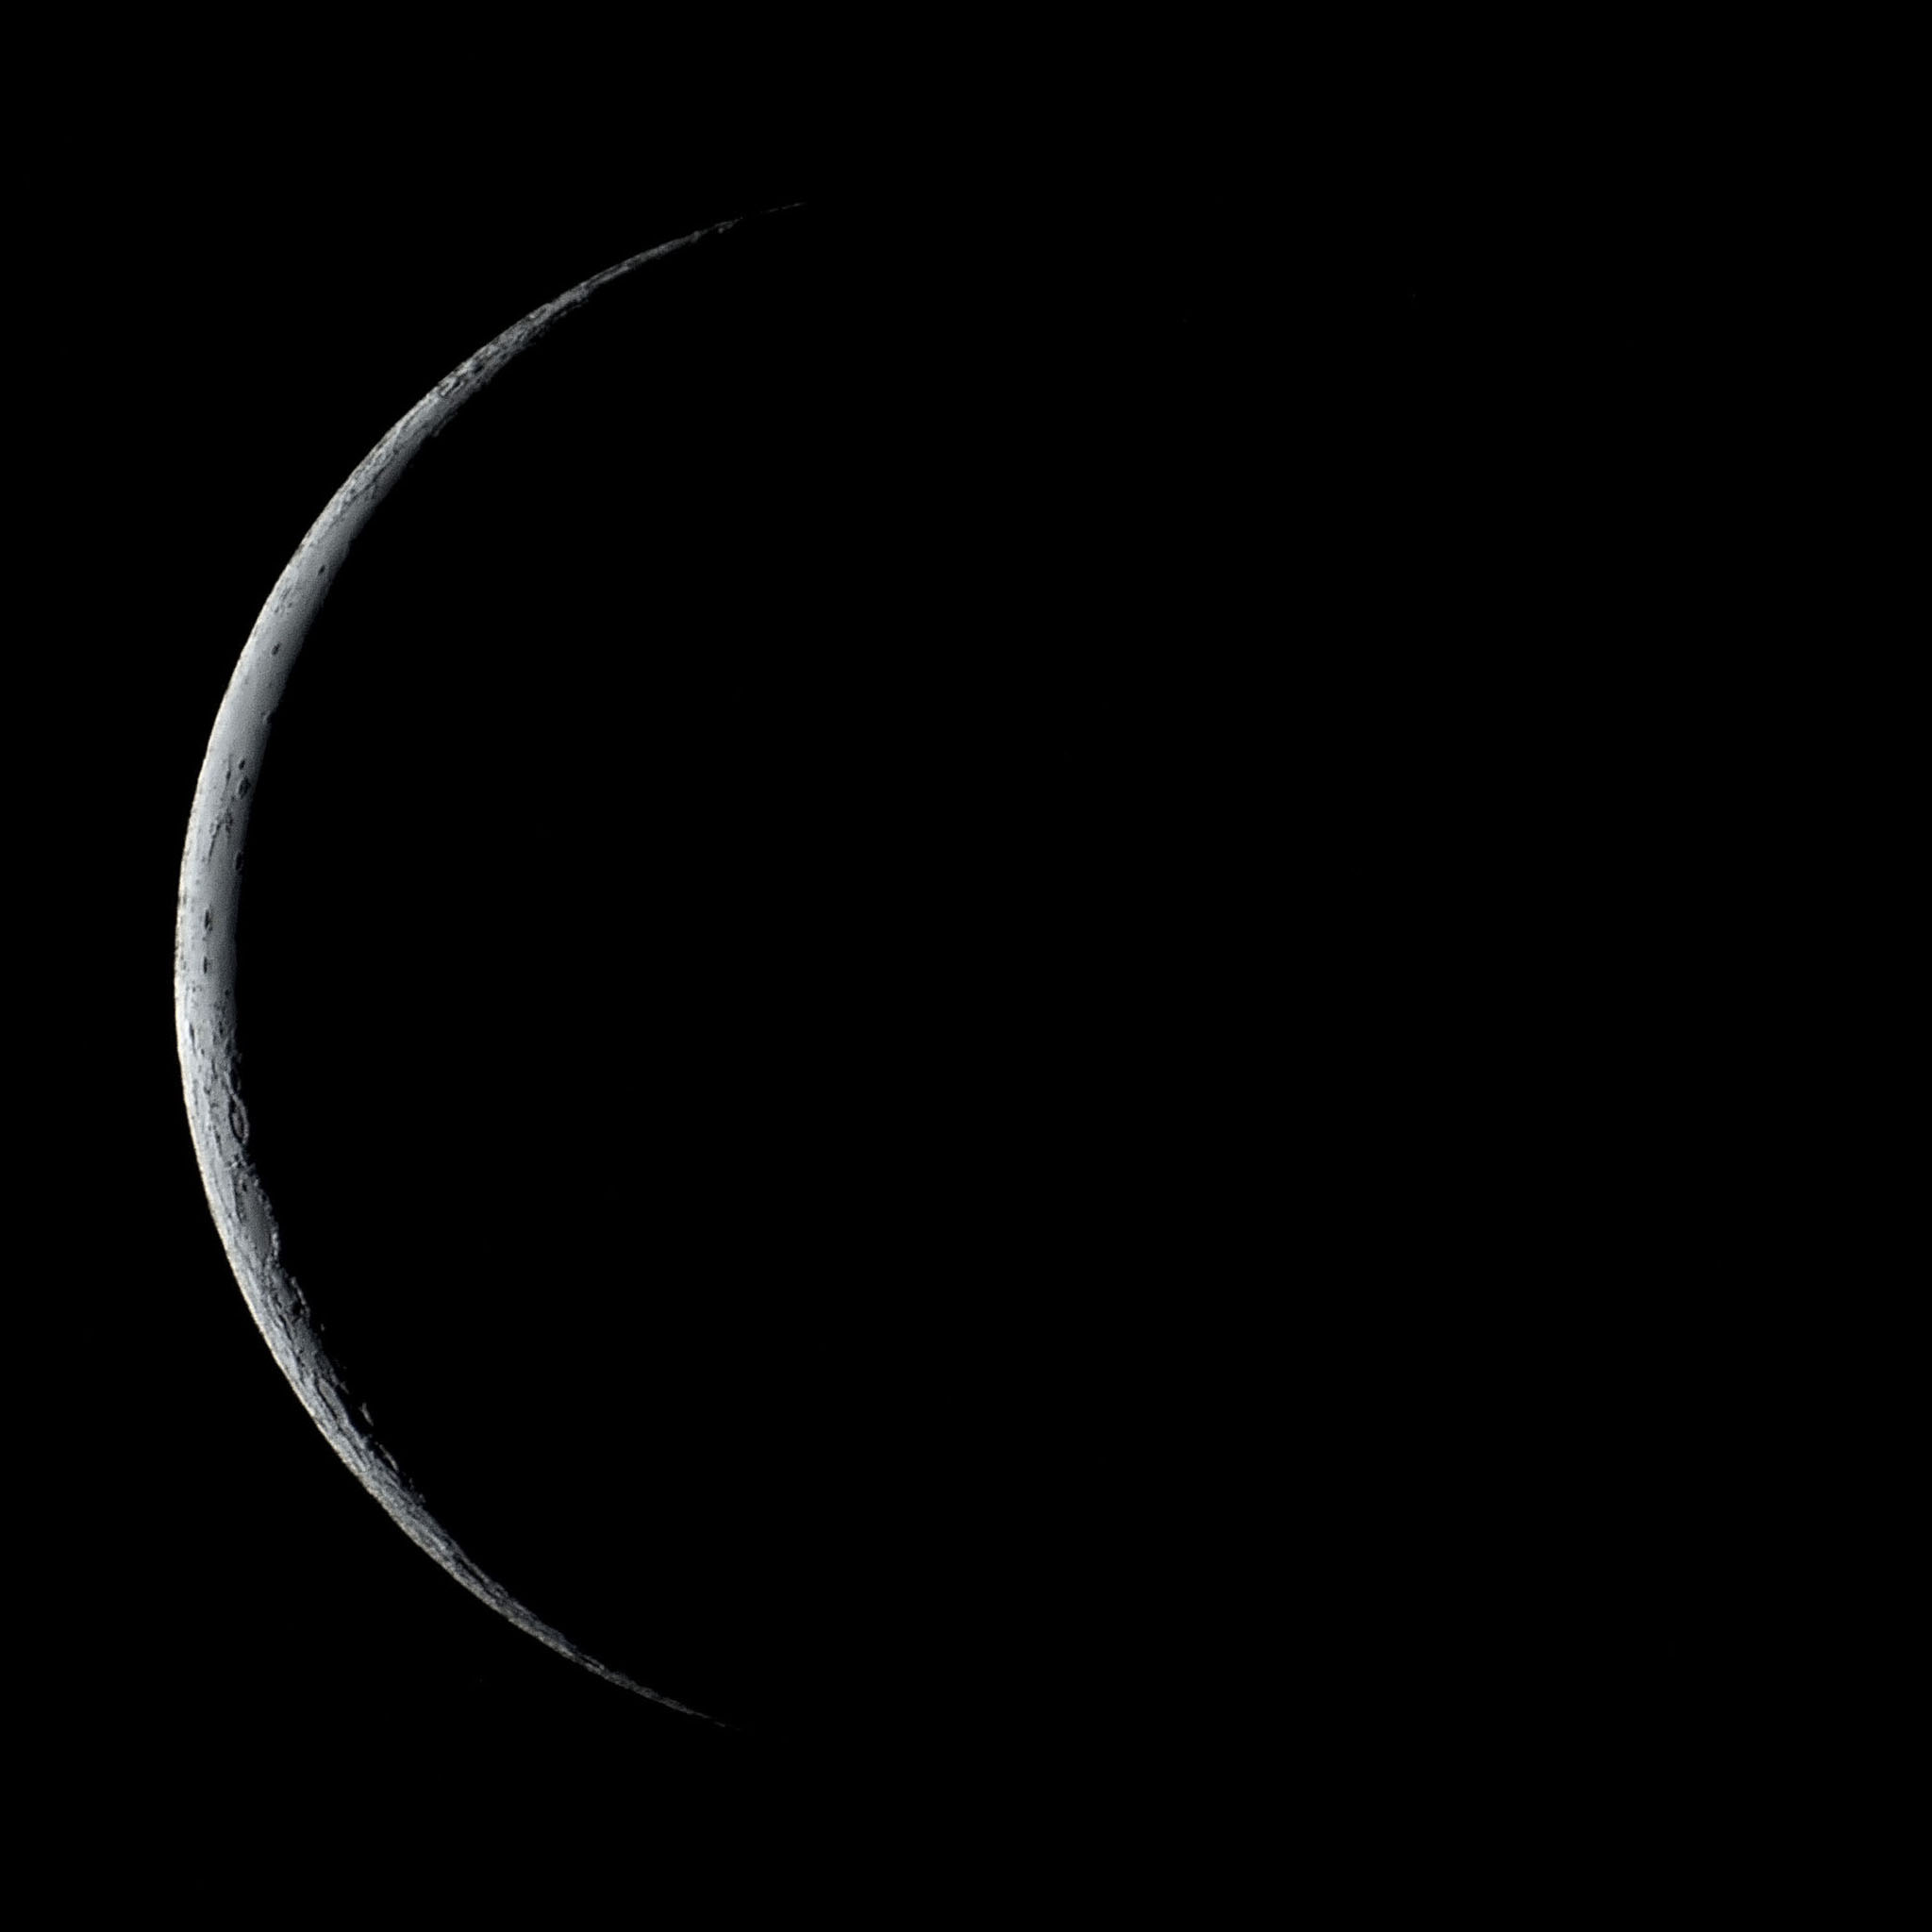 A waning crescent moon is seen in the sky